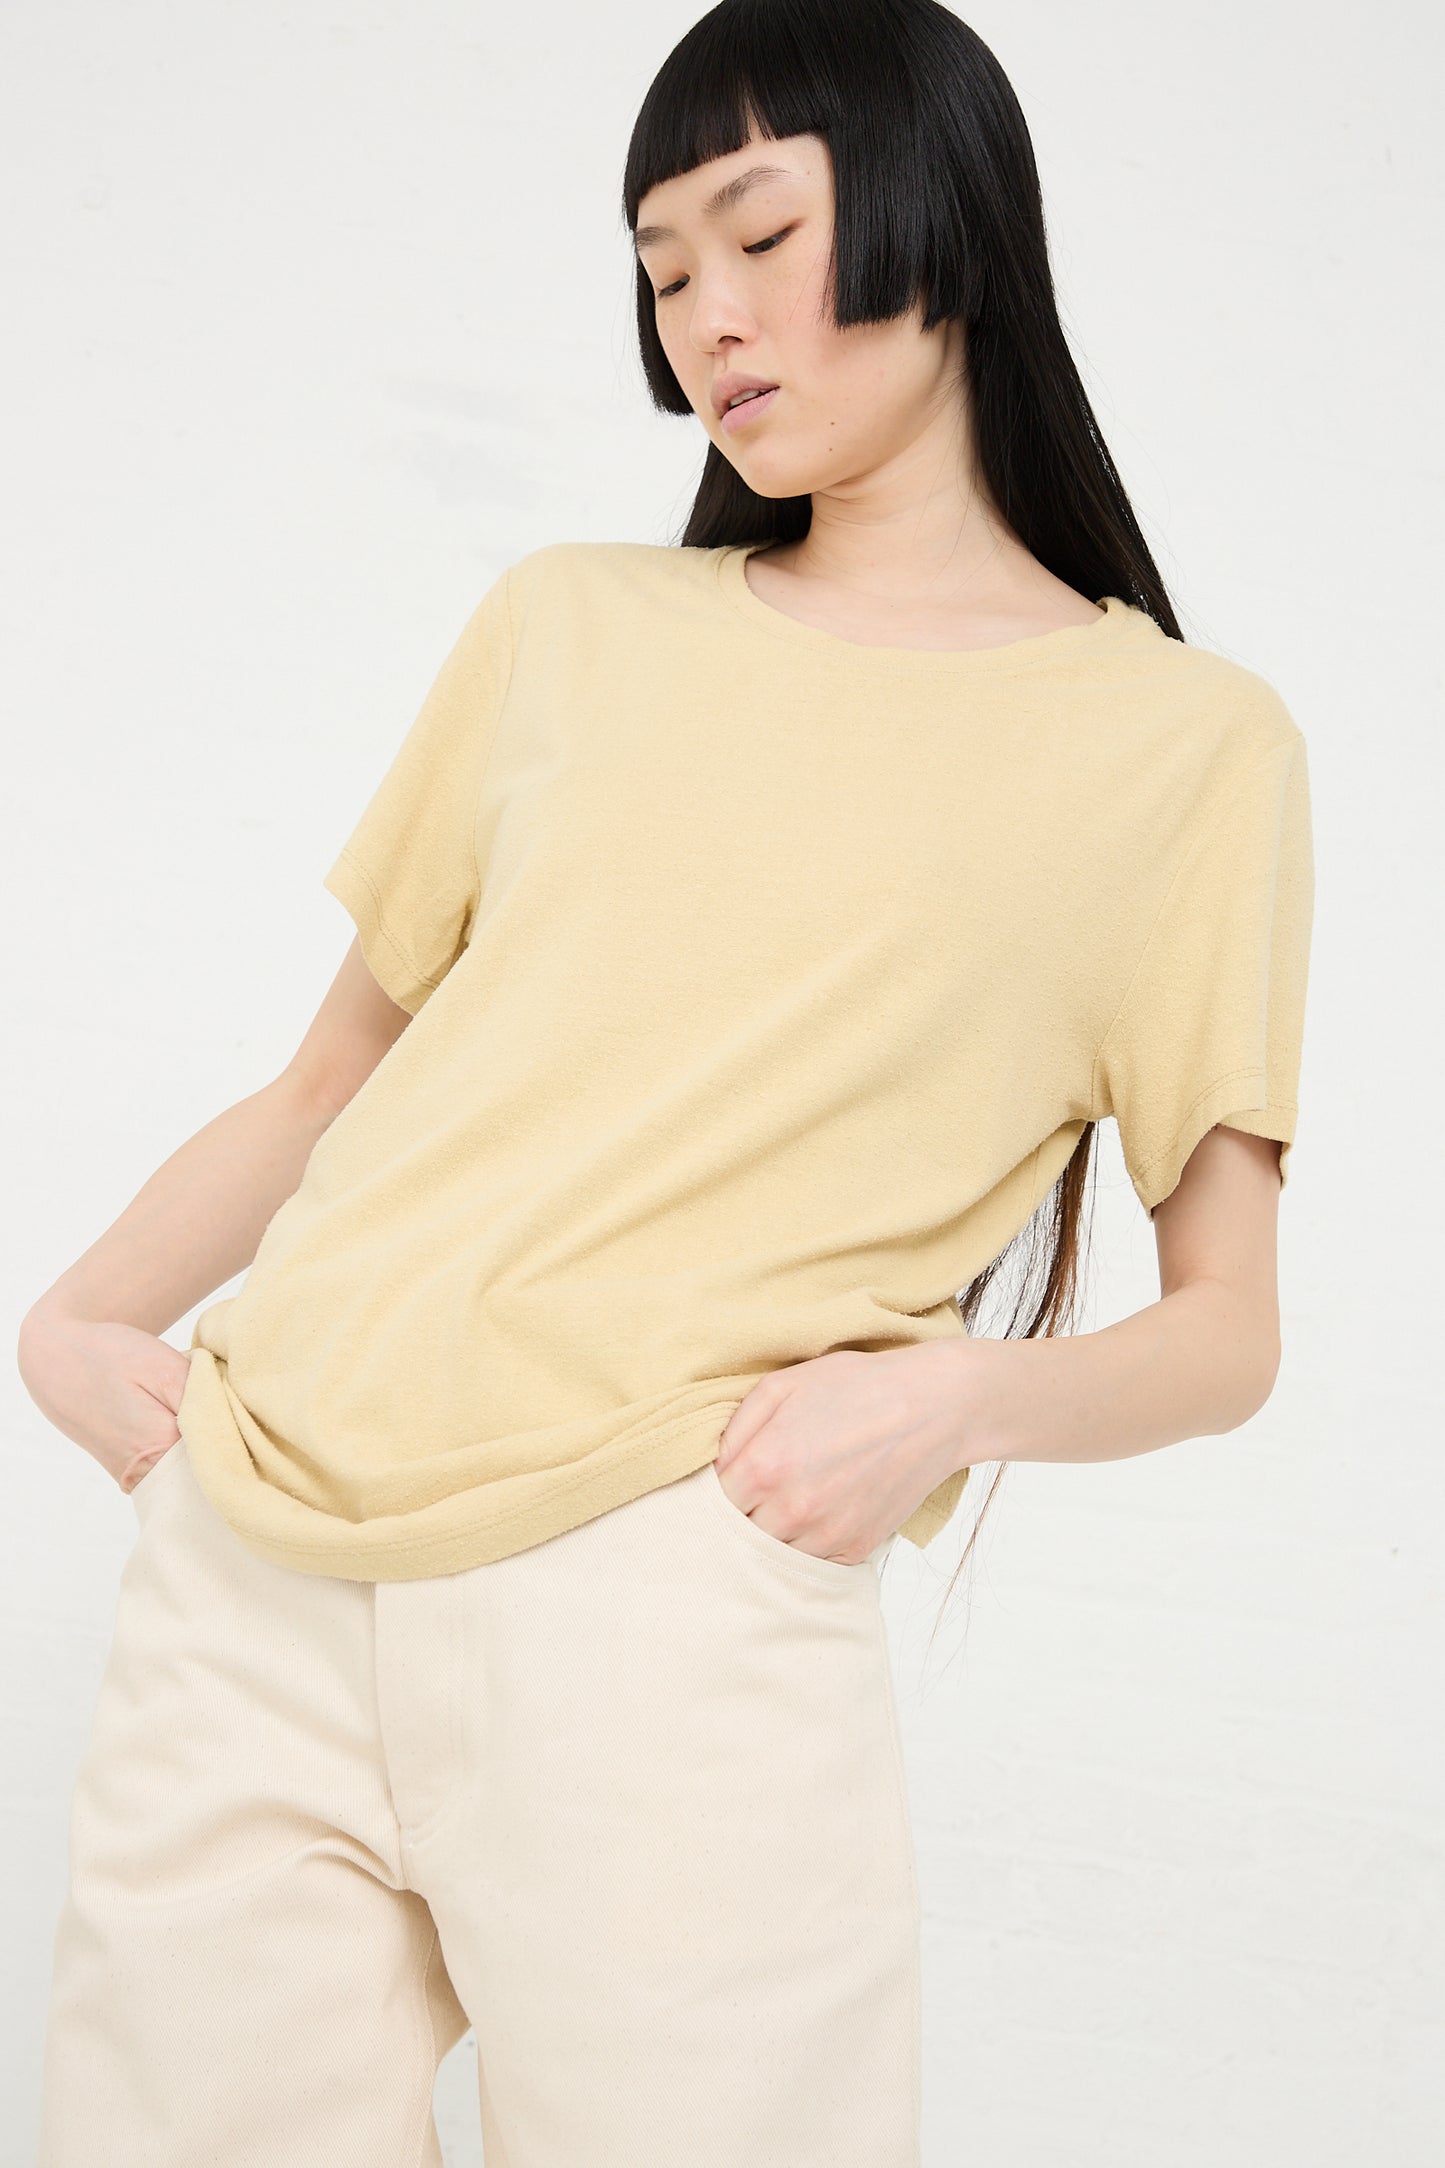 A woman with dark hair posing with her hand on her hip, wearing a Baserange Wild Silk Jersey Tee in Oak Yellow and beige pants against a white background.